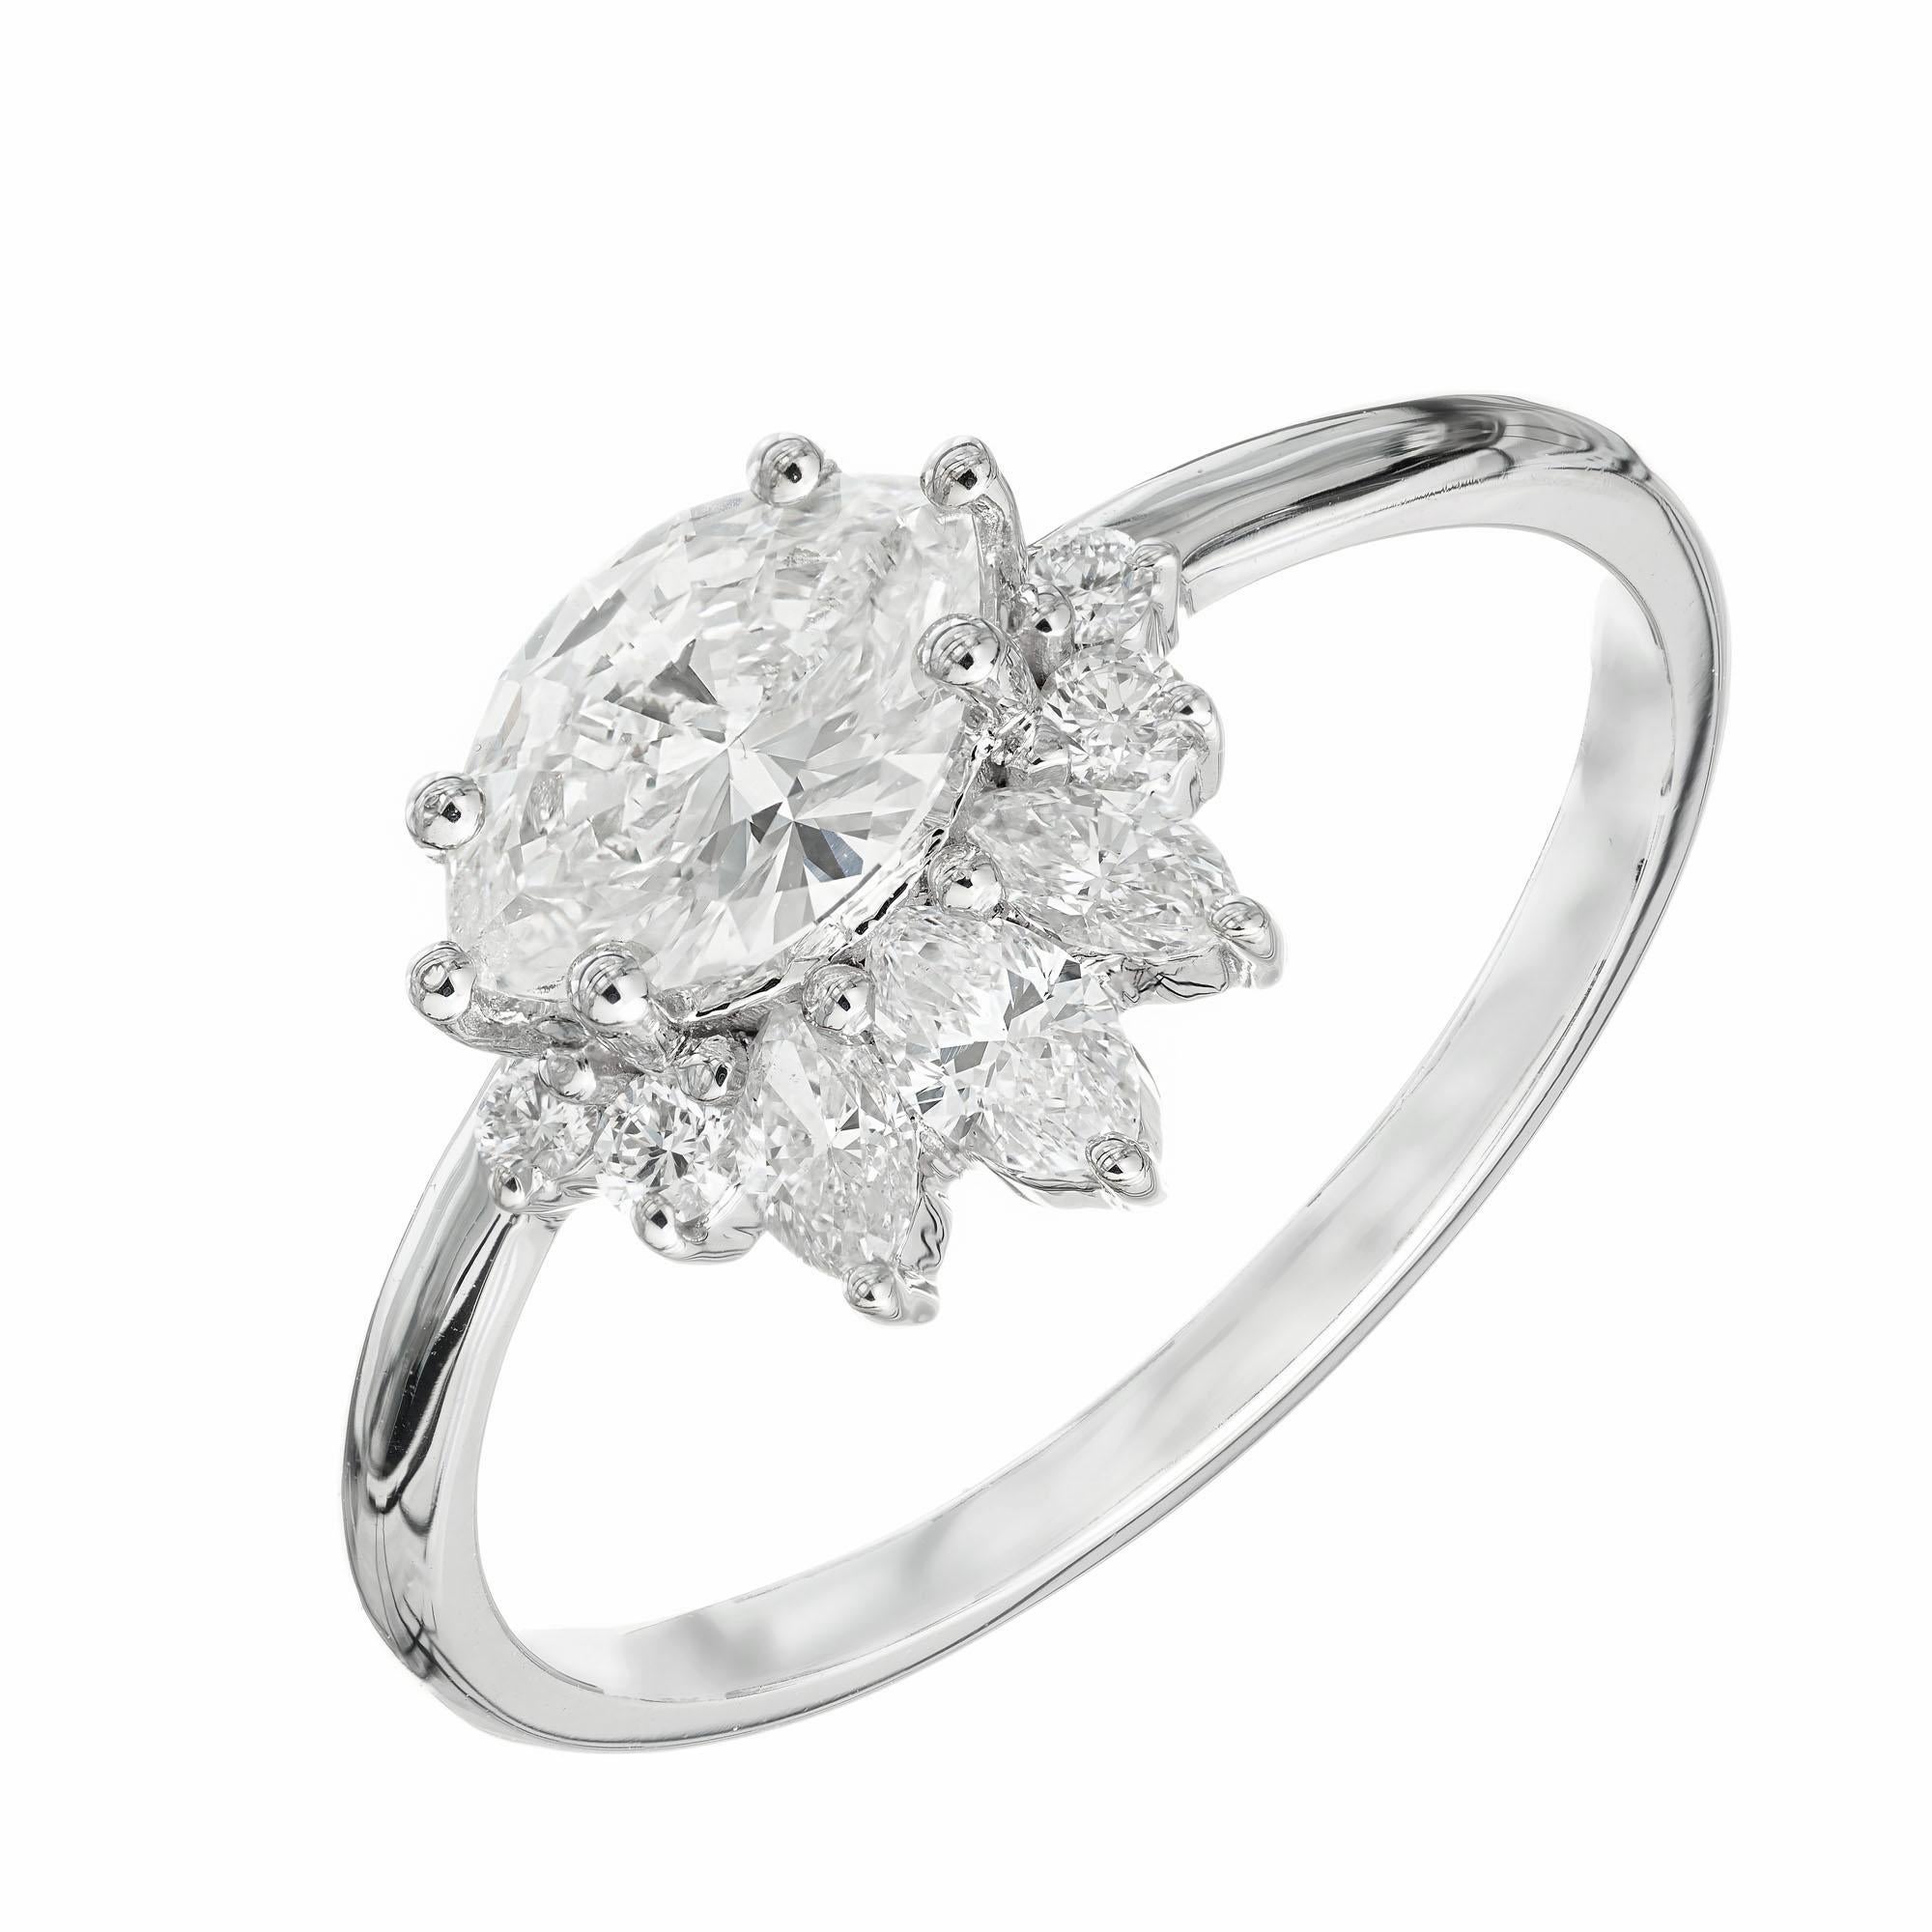 Tiara design alternative diamond engagement ring. GIA certified marquise diamond with marquise and round diamond halo in a 18k white gold setting. Designed and crafted in the Peter Suchy Workshop.

1 marquise shaped diamond, I SI2 approx. .70cts GIA